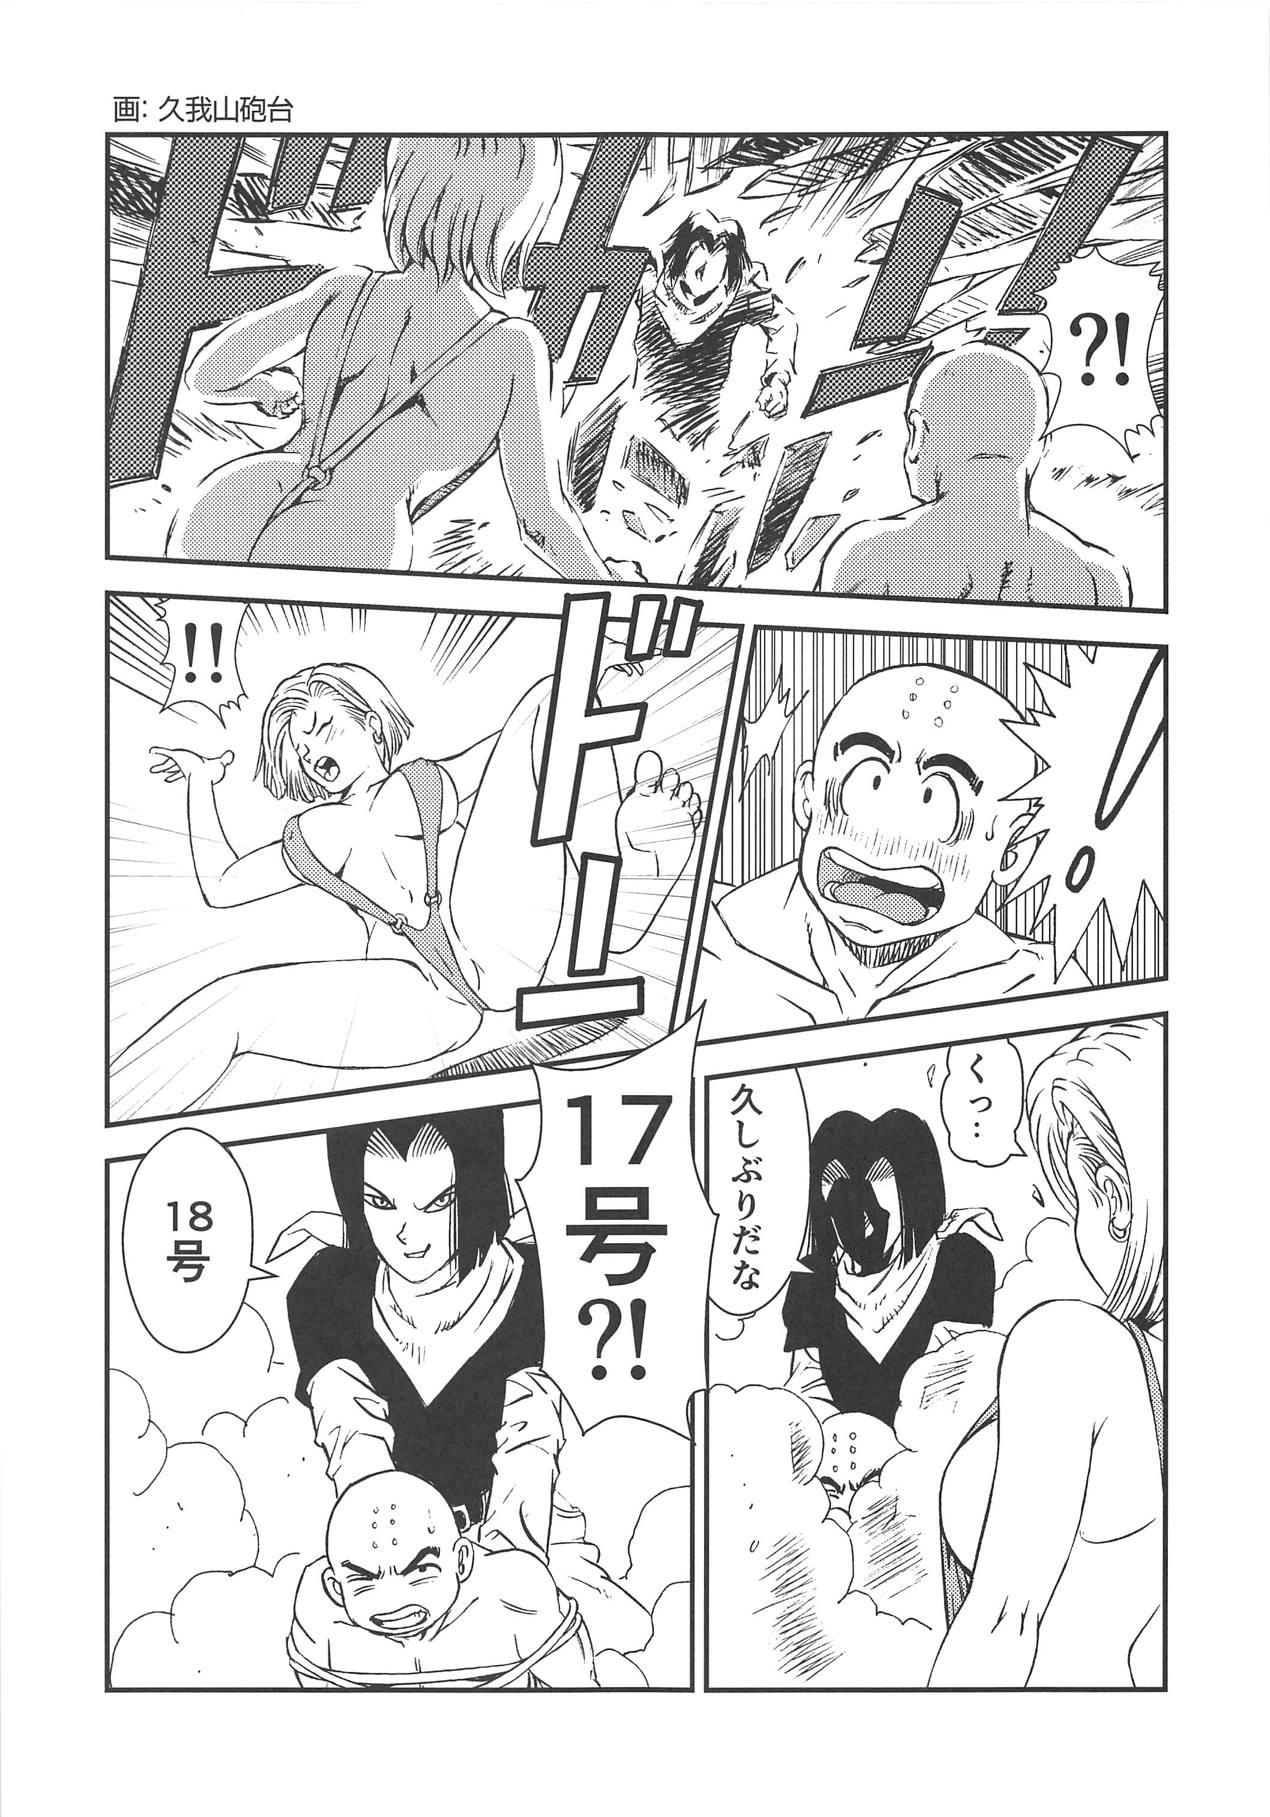 Wife 18+ 3 - Dragon ball z Clothed Sex - Page 5